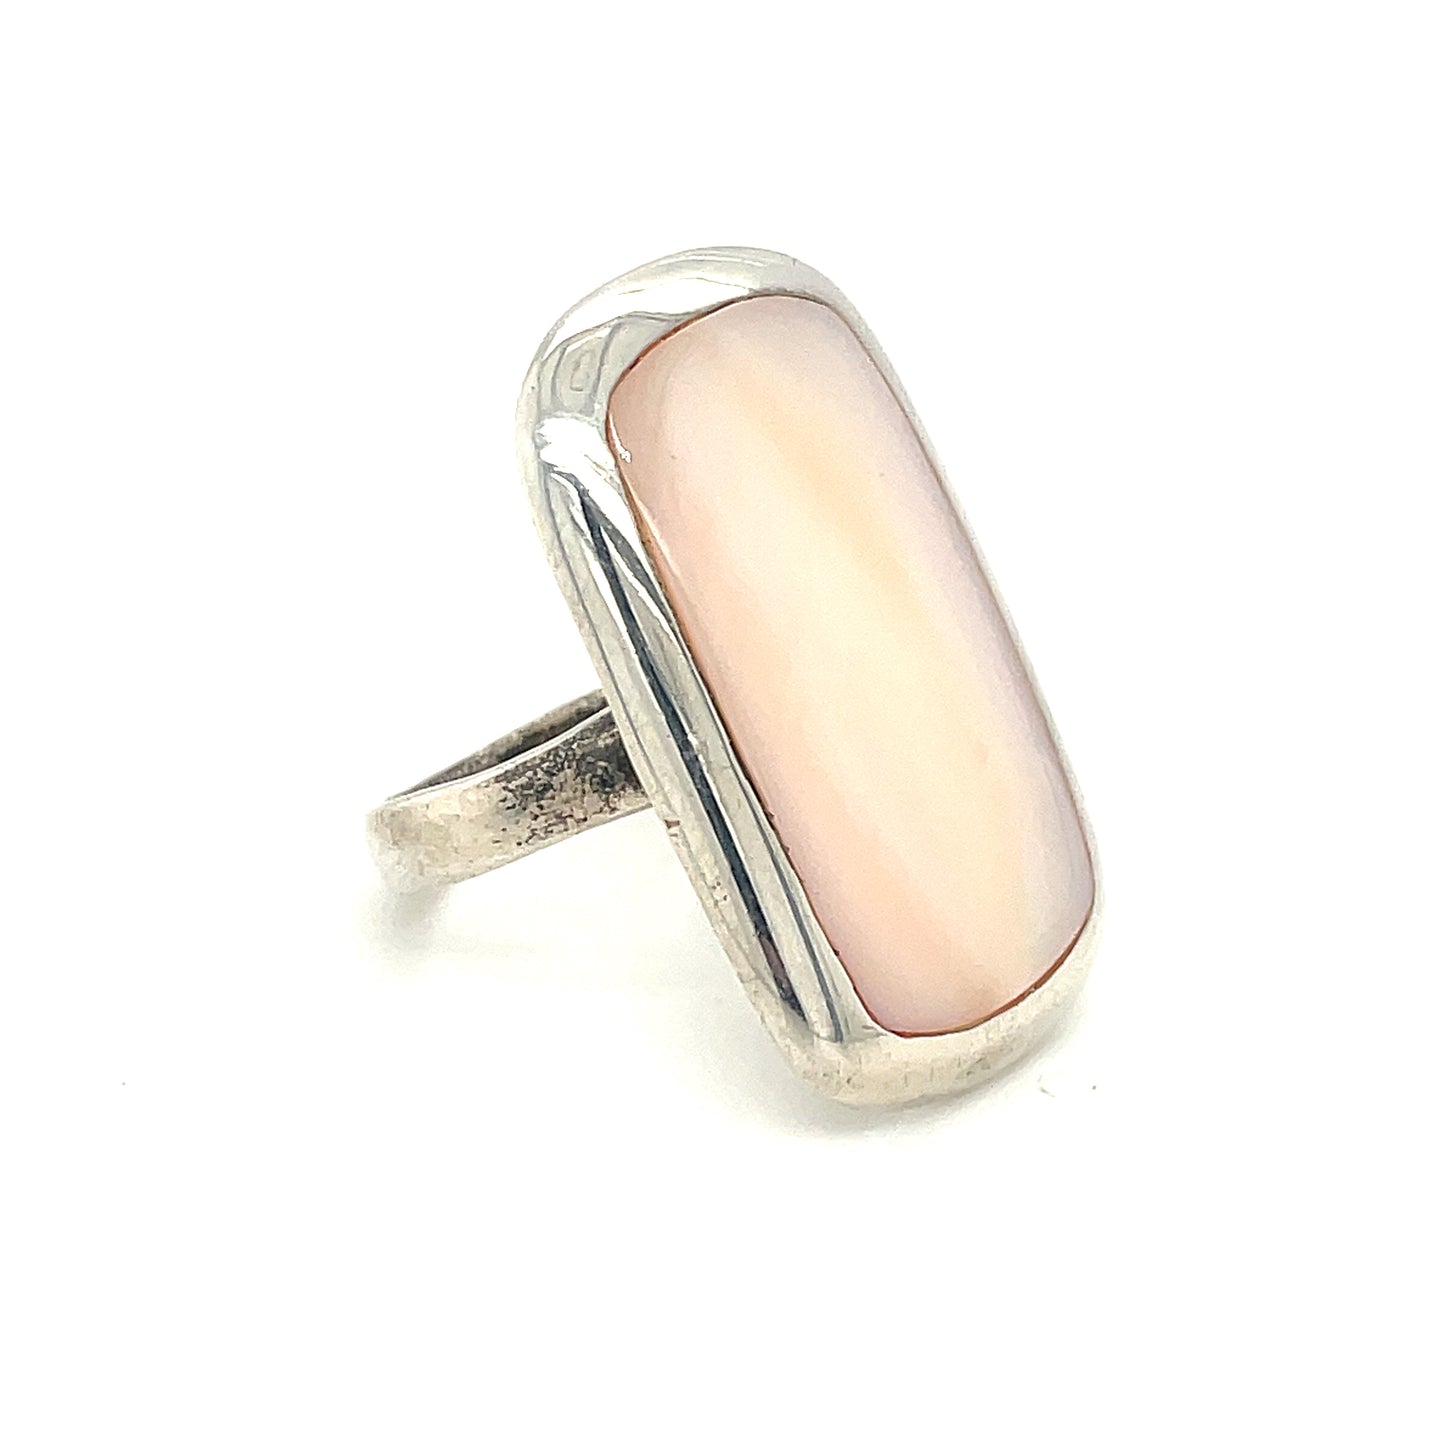 Vintage Sterling Silver Mother of Pearl Ring Size 7.5